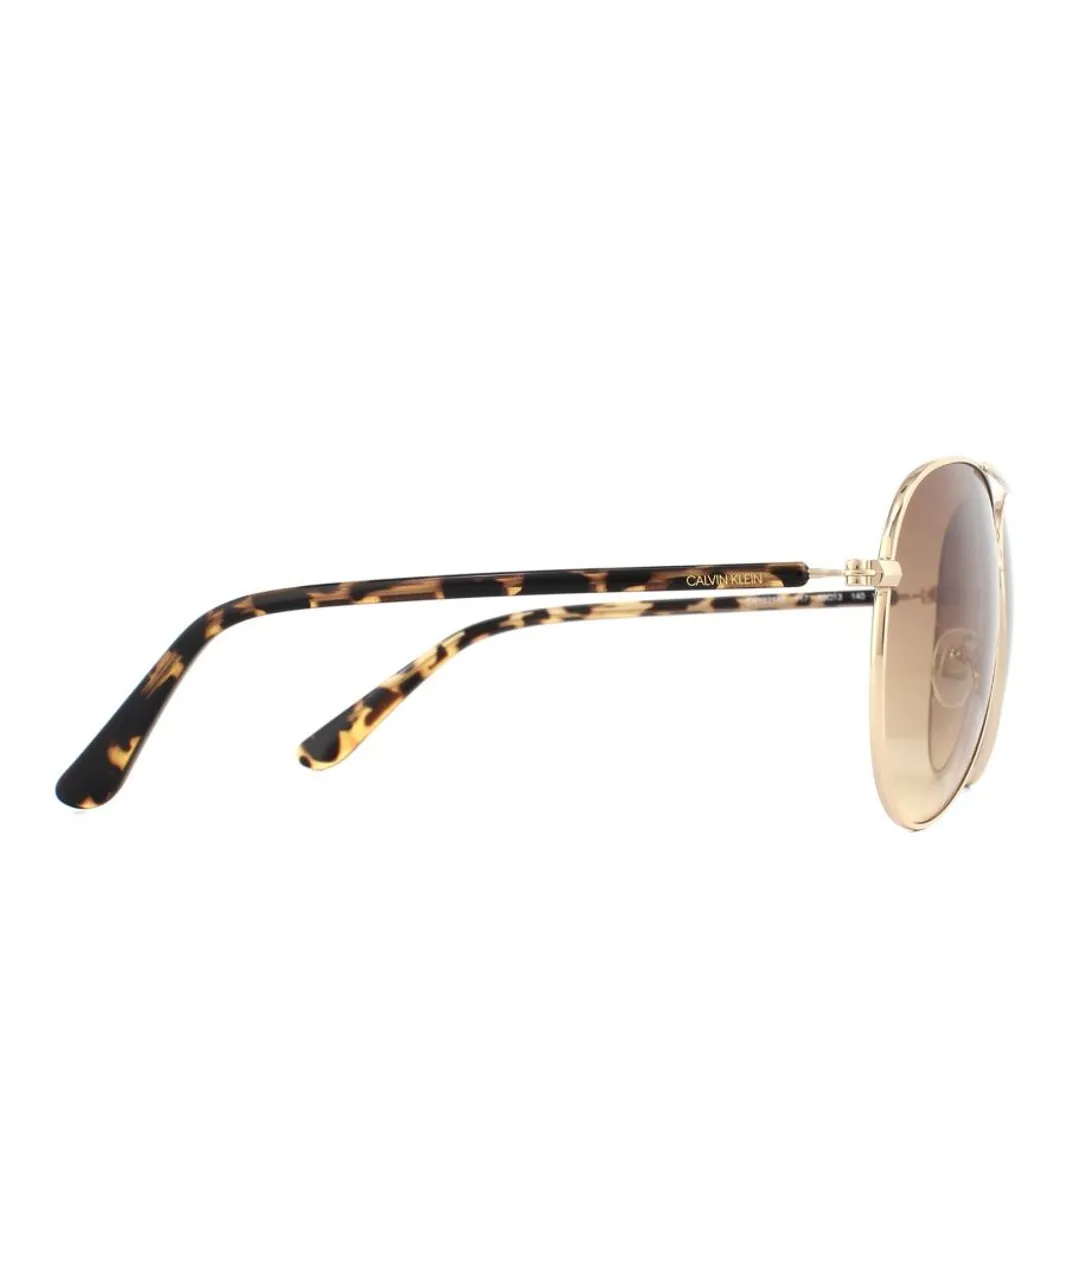 Calvin Klein Mens Sunglasses CK19314S 717 Gold Tortoise Brown Gradient Metal (archived) - One